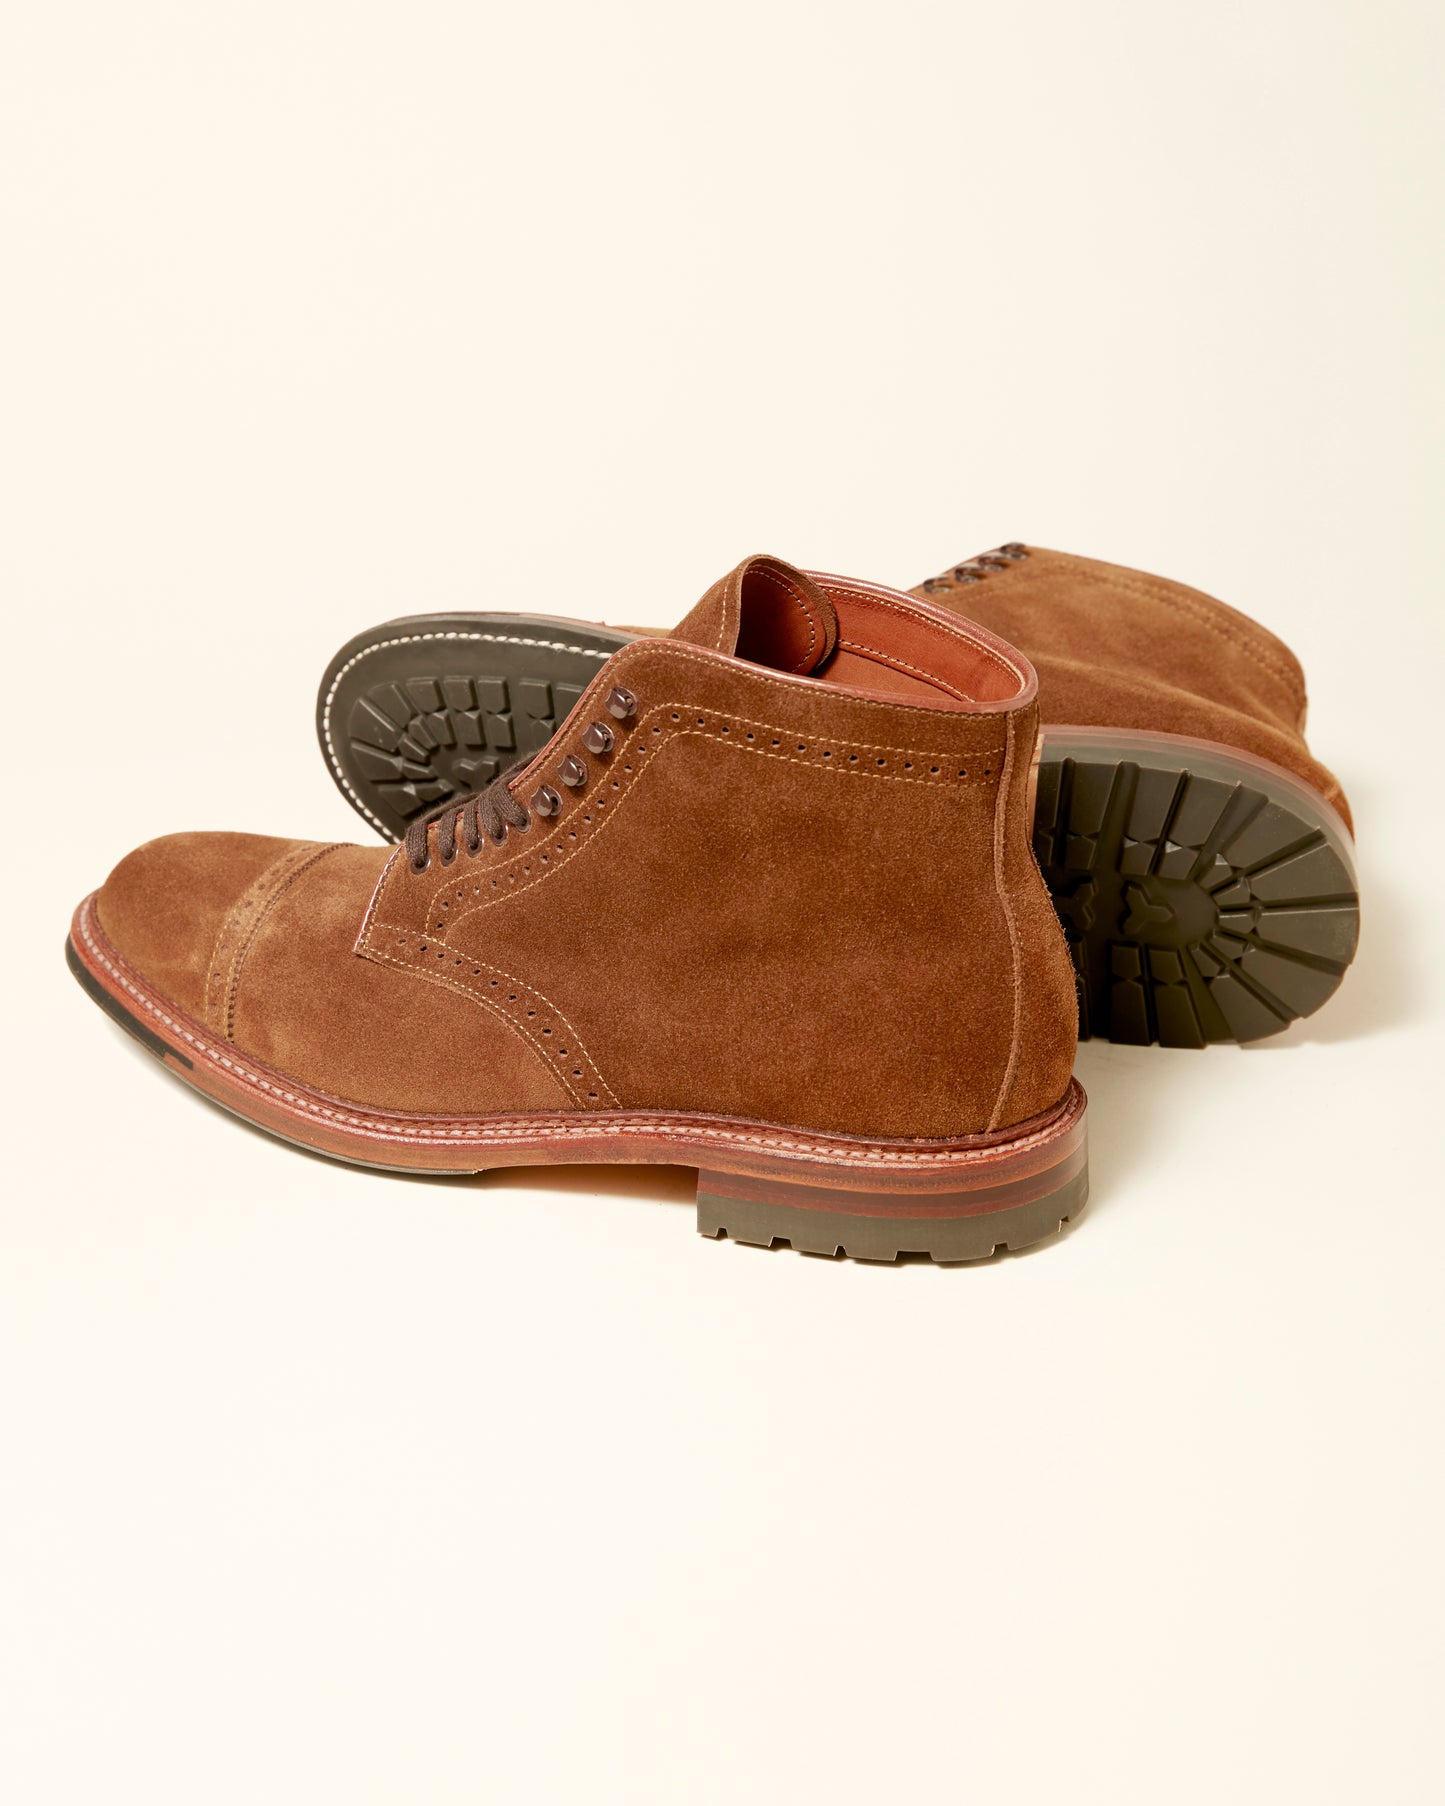 "Davis" Snuff Suede Perforated Straight Tip Boot